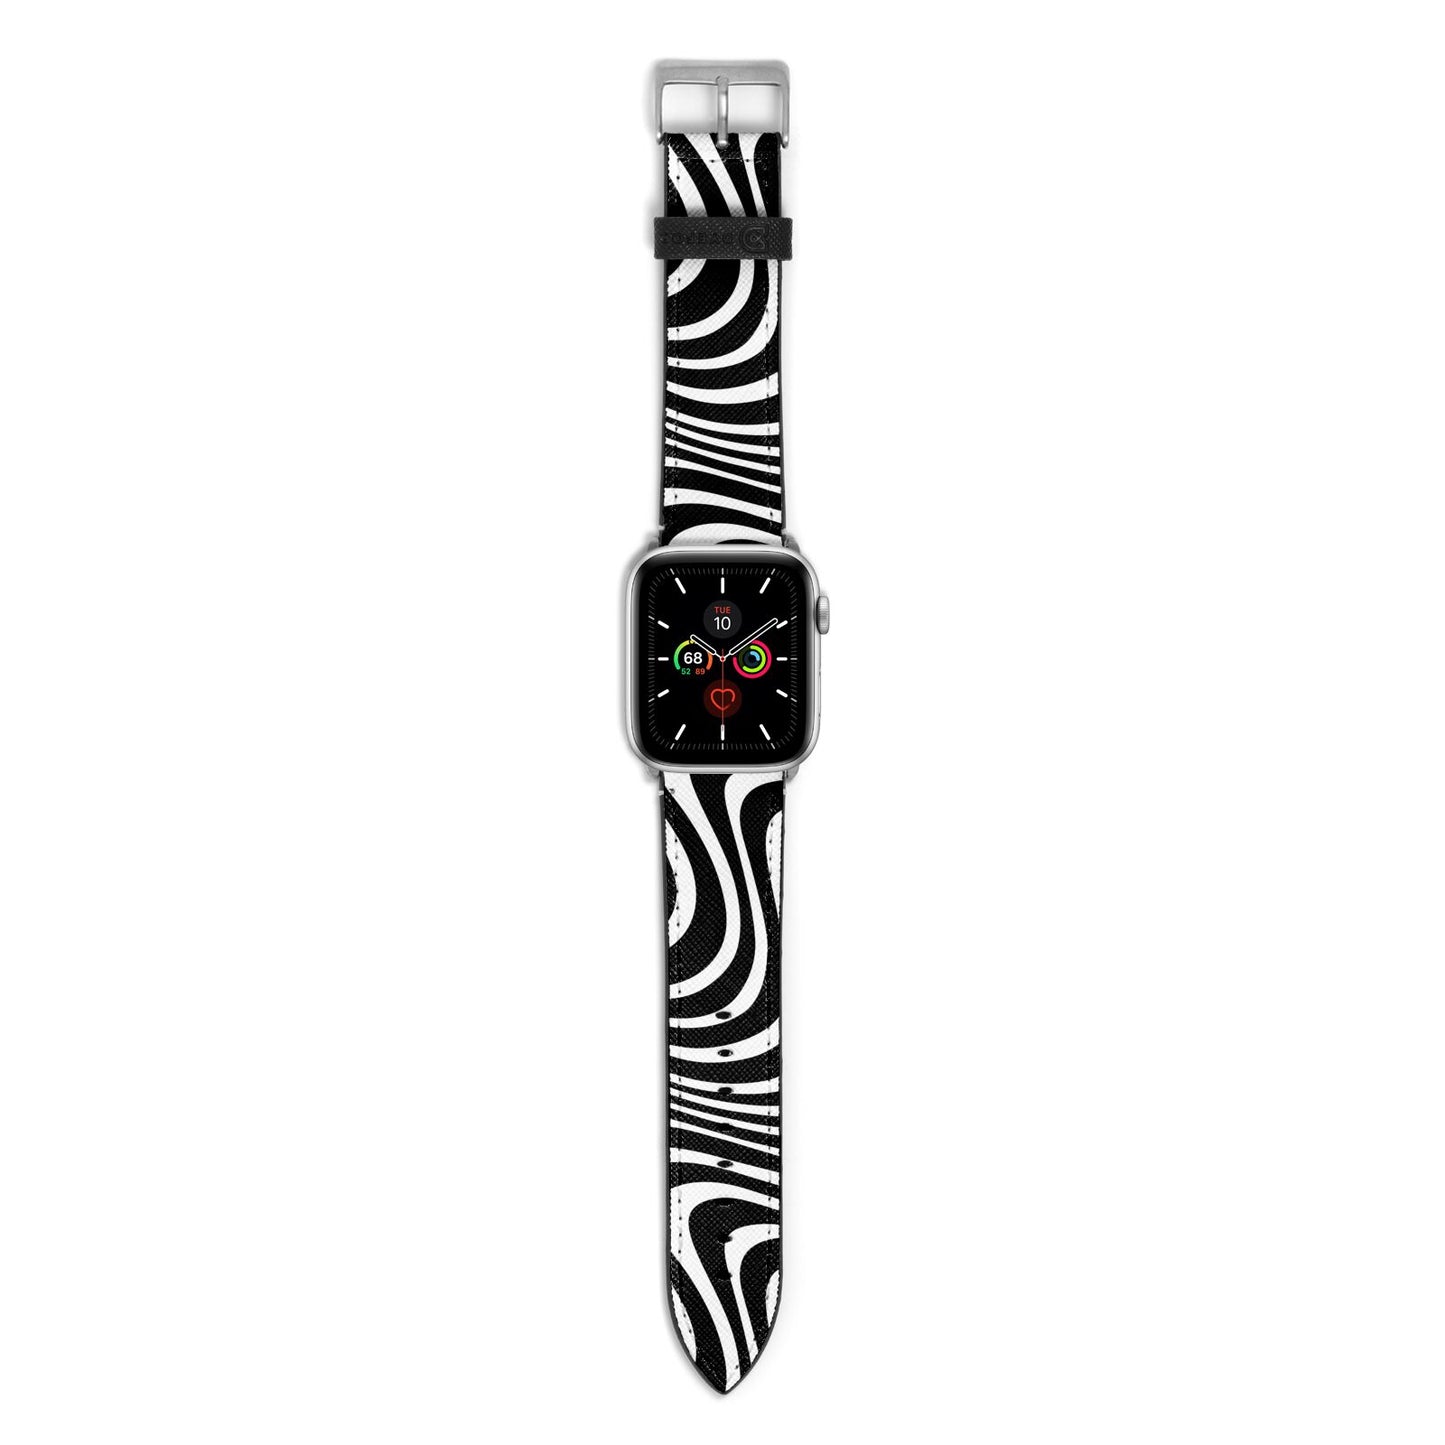 Black Wave Apple Watch Strap with Silver Hardware